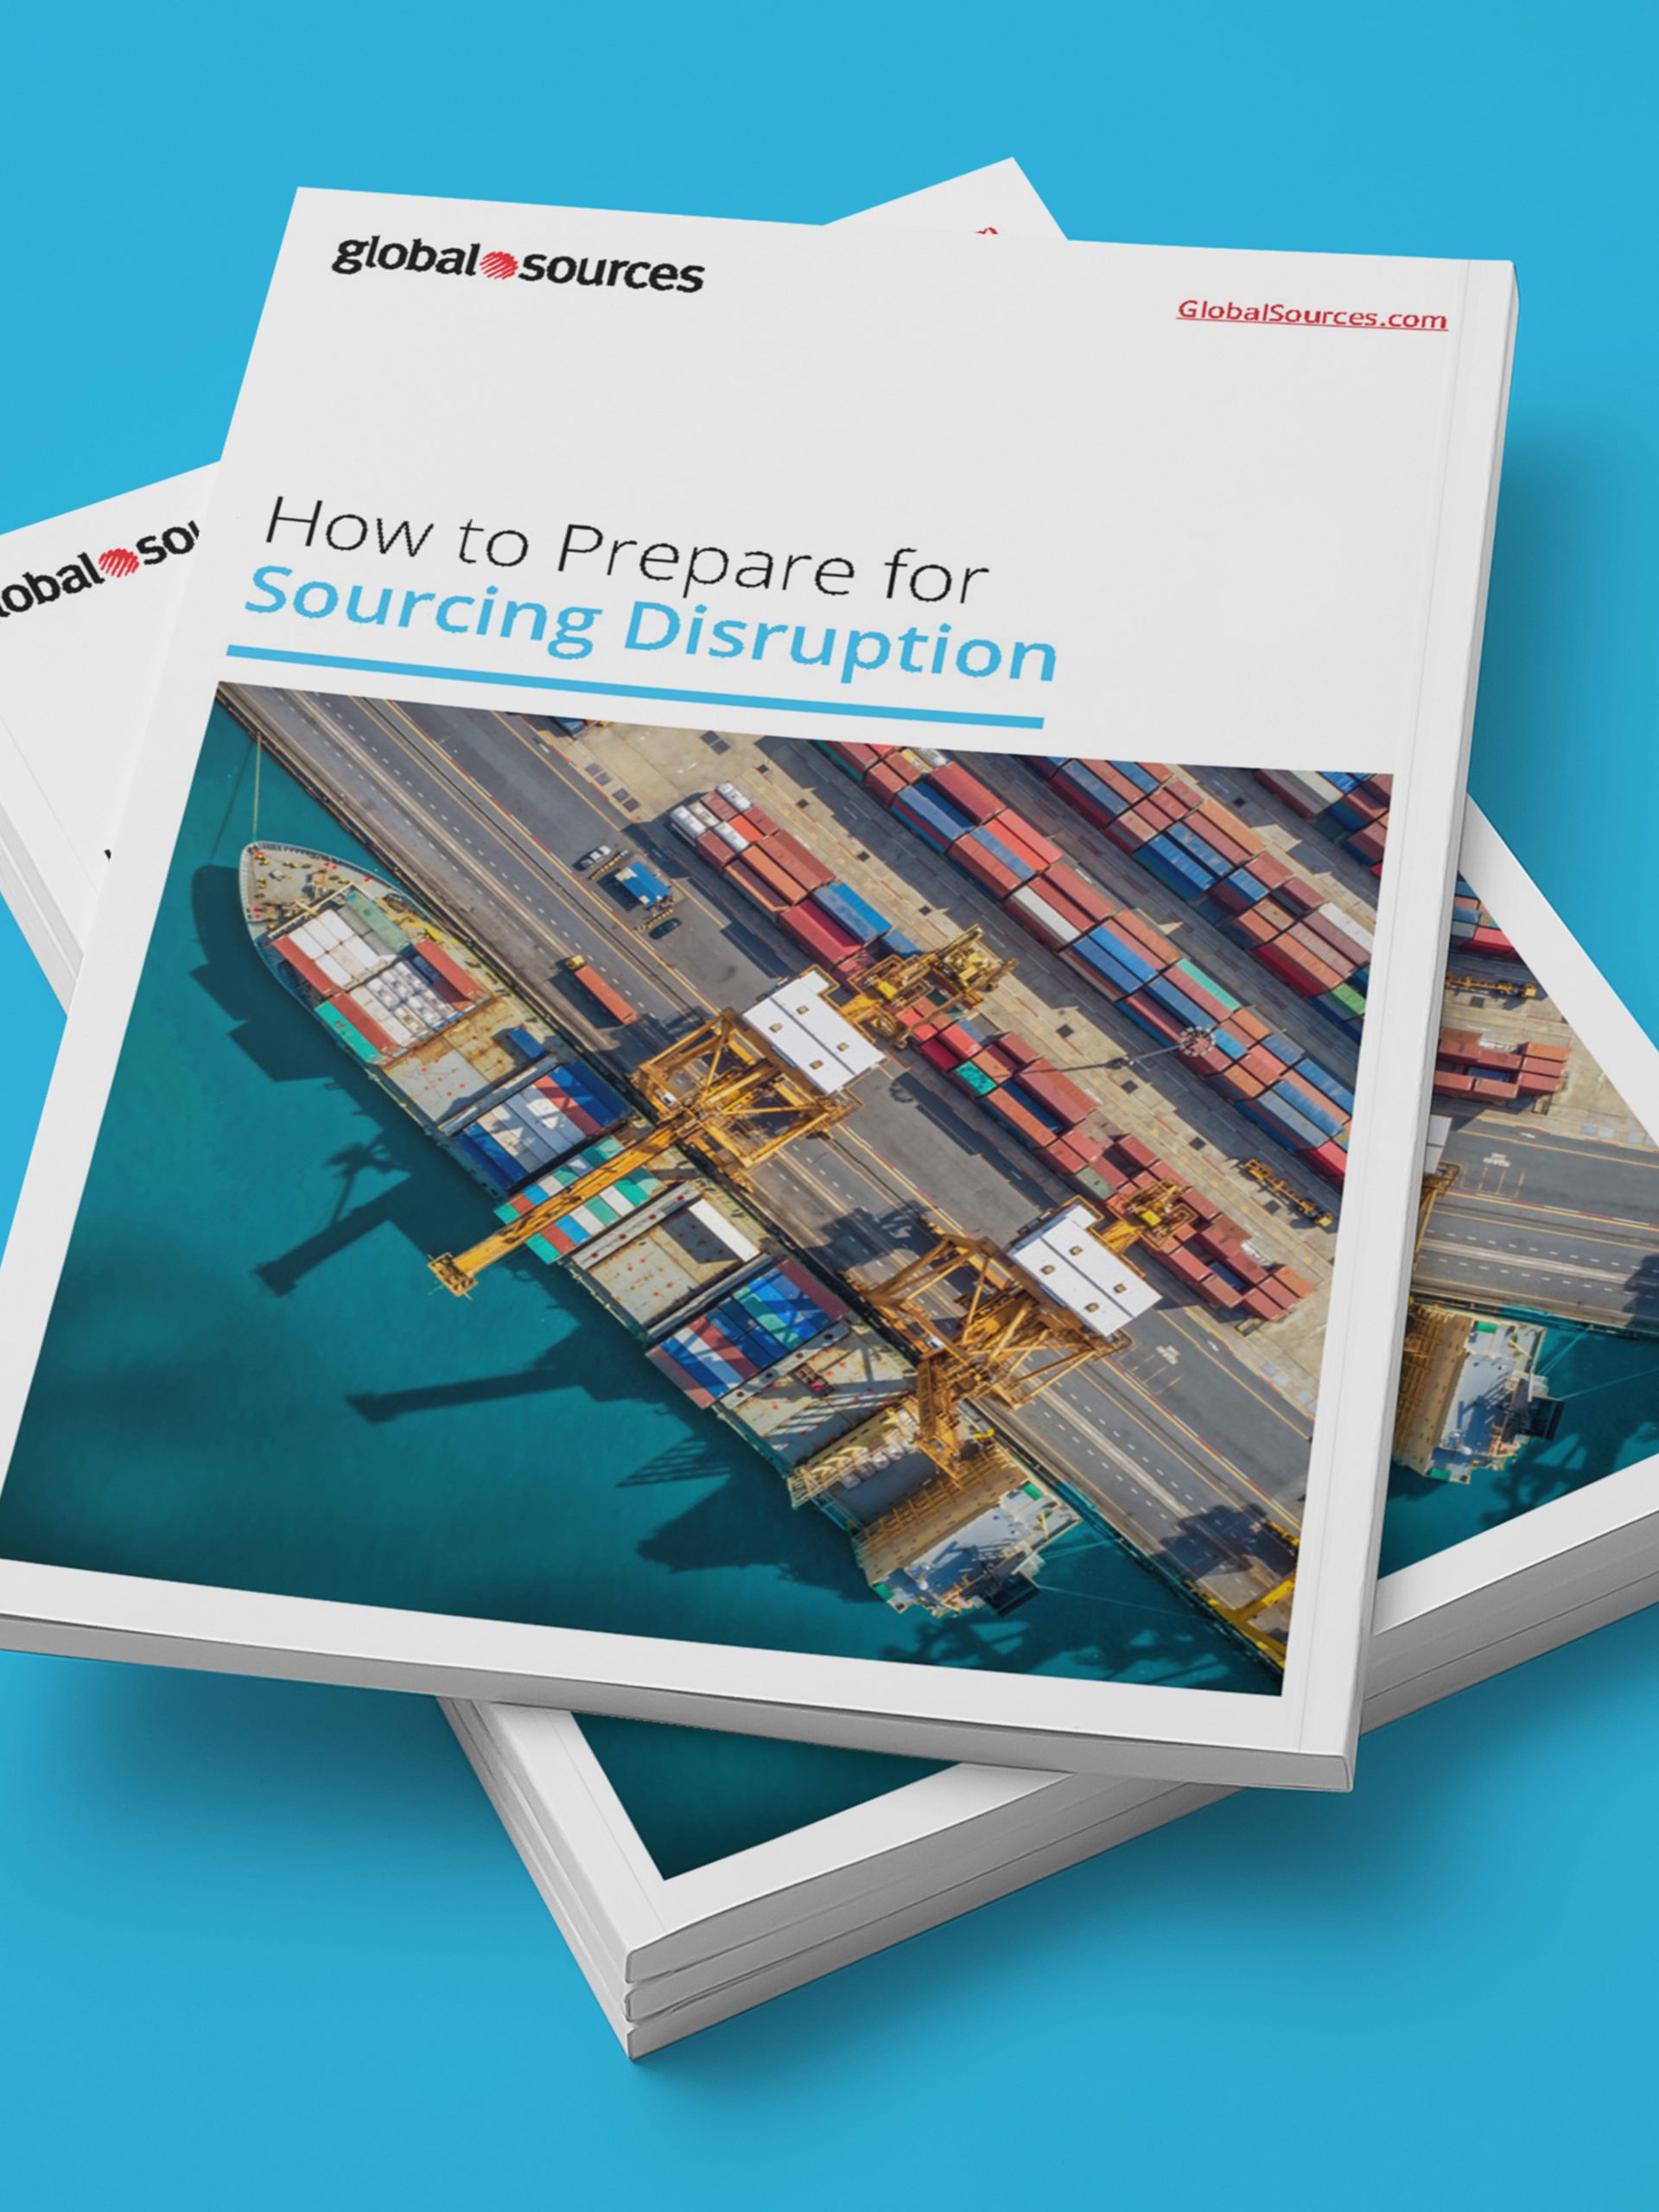 Global Sources Marketing E Book Design How to Prepare for Sourcing Disruption